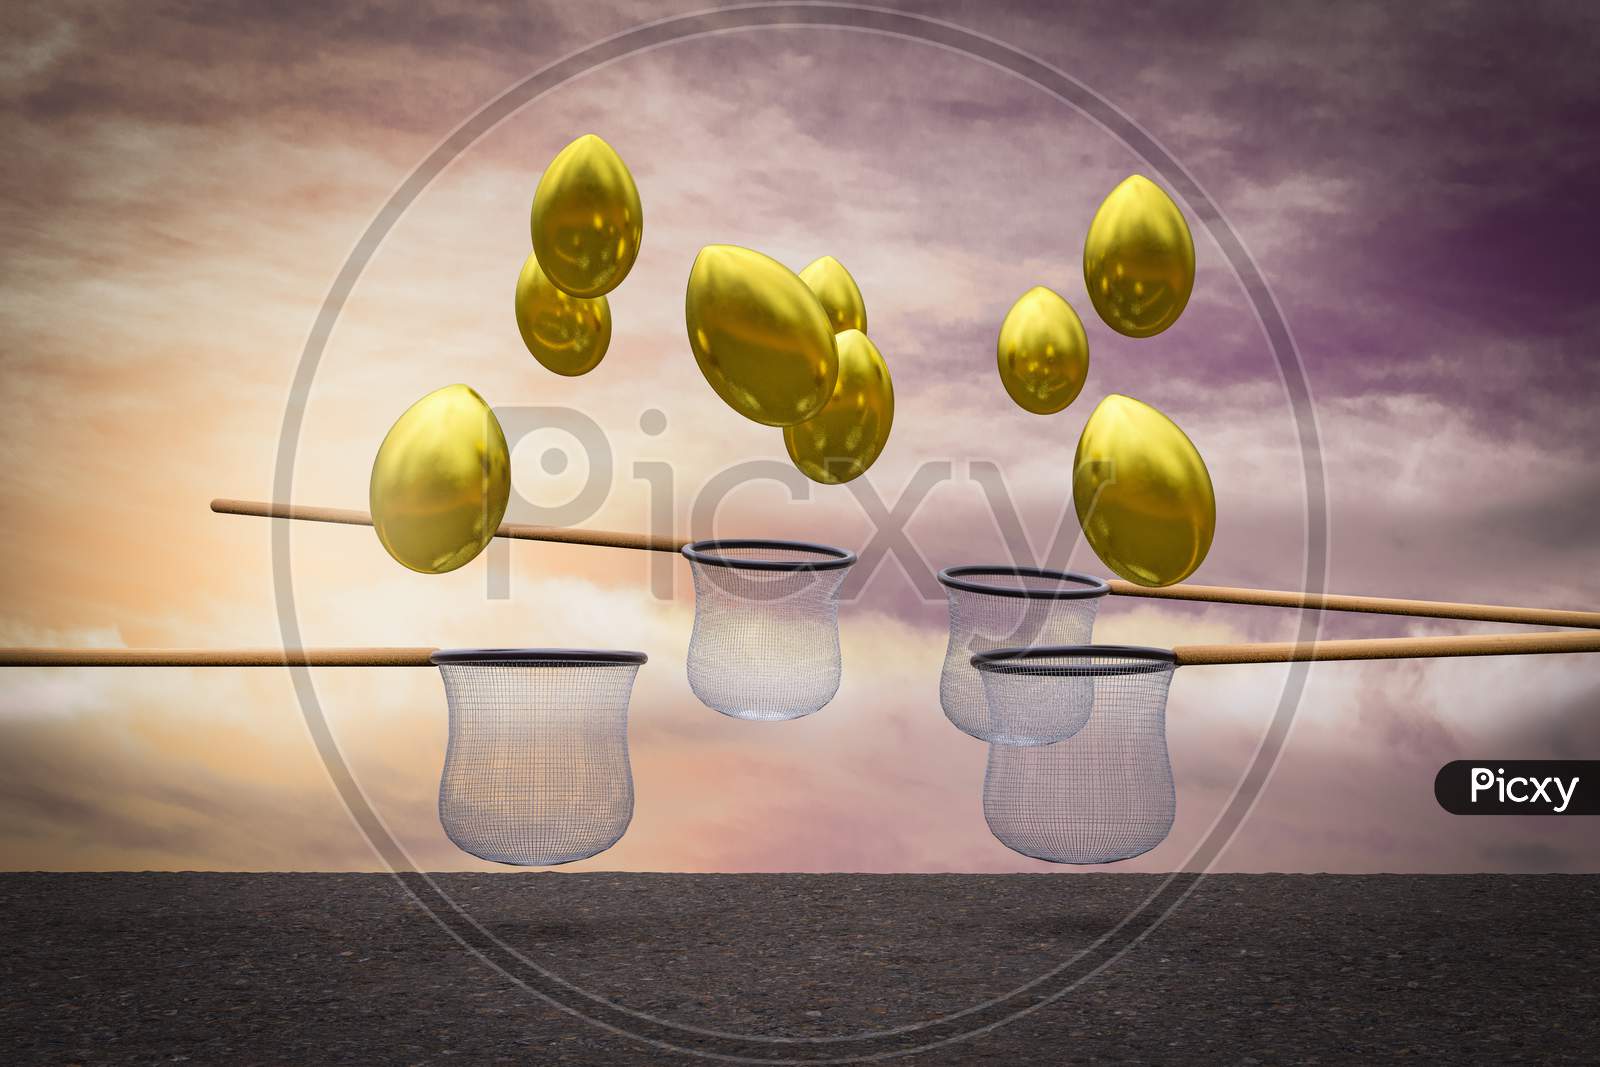 Golden Eggs Falling From Sky And The Nets Try To Catch Them At Sunset Magenta Day Demonstrating Retirement Concept. 3D Illustration